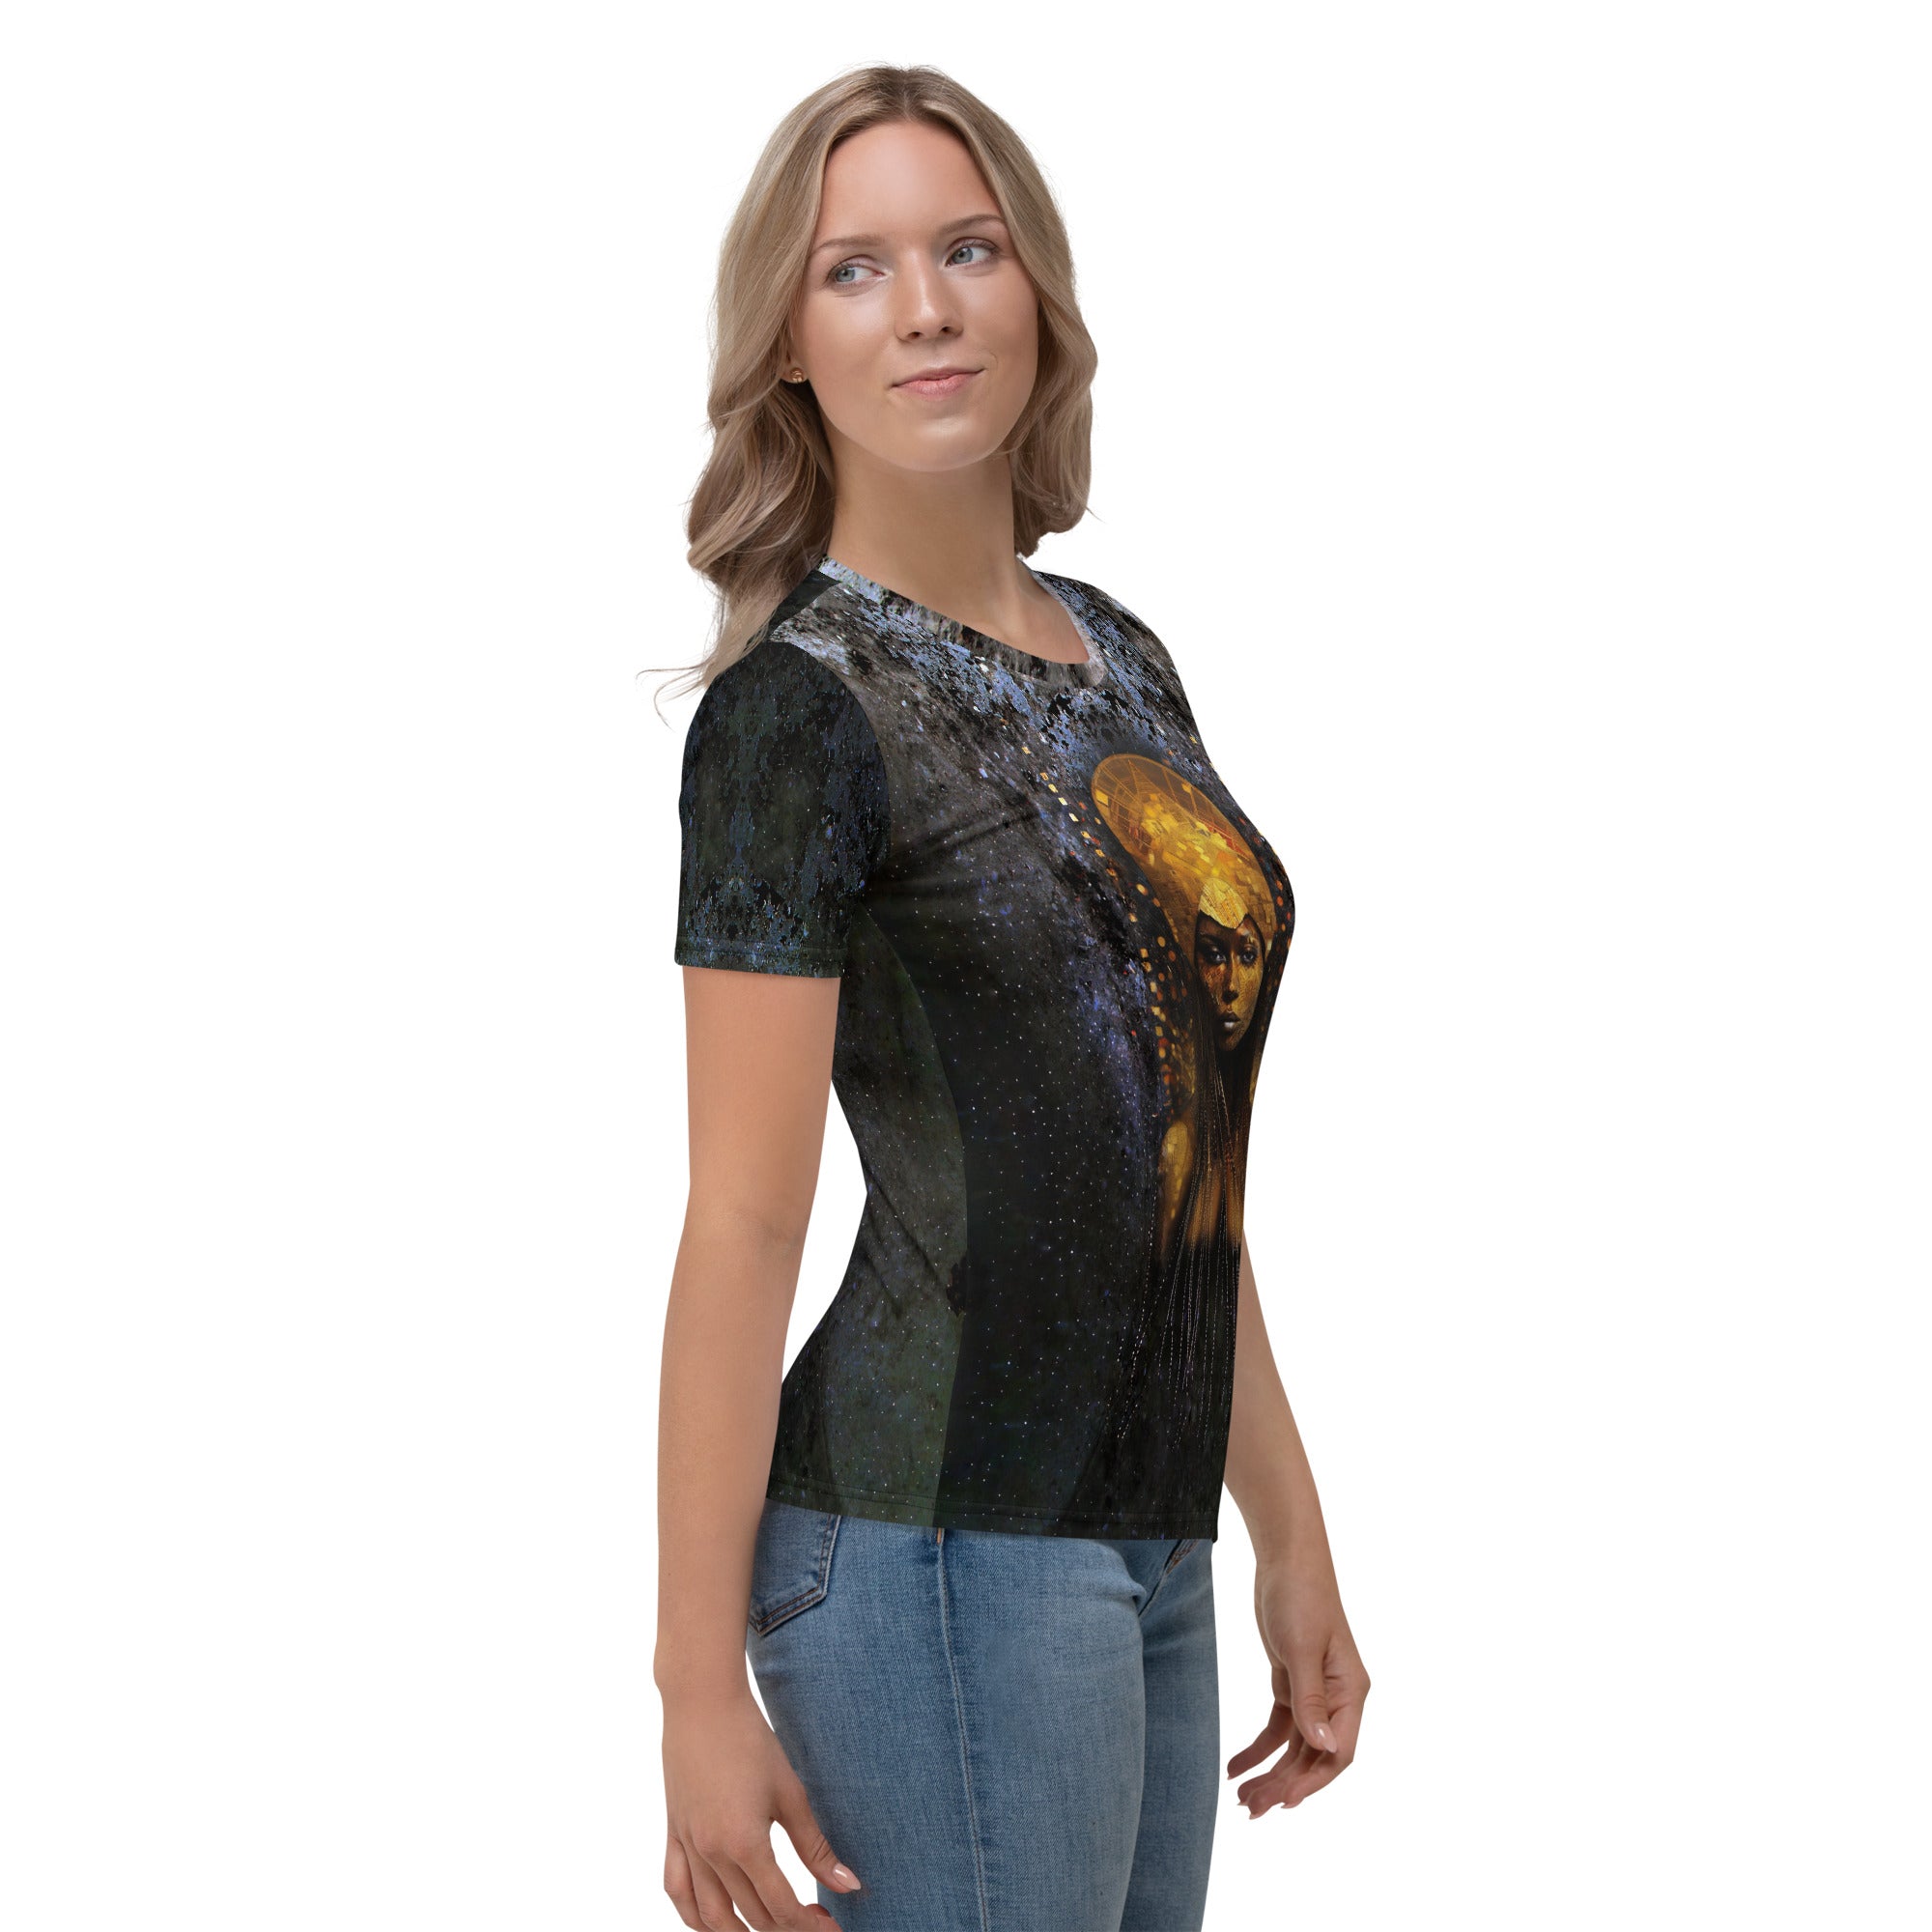 Fashionable female in vibrant Abstract Artistry crewneck tee